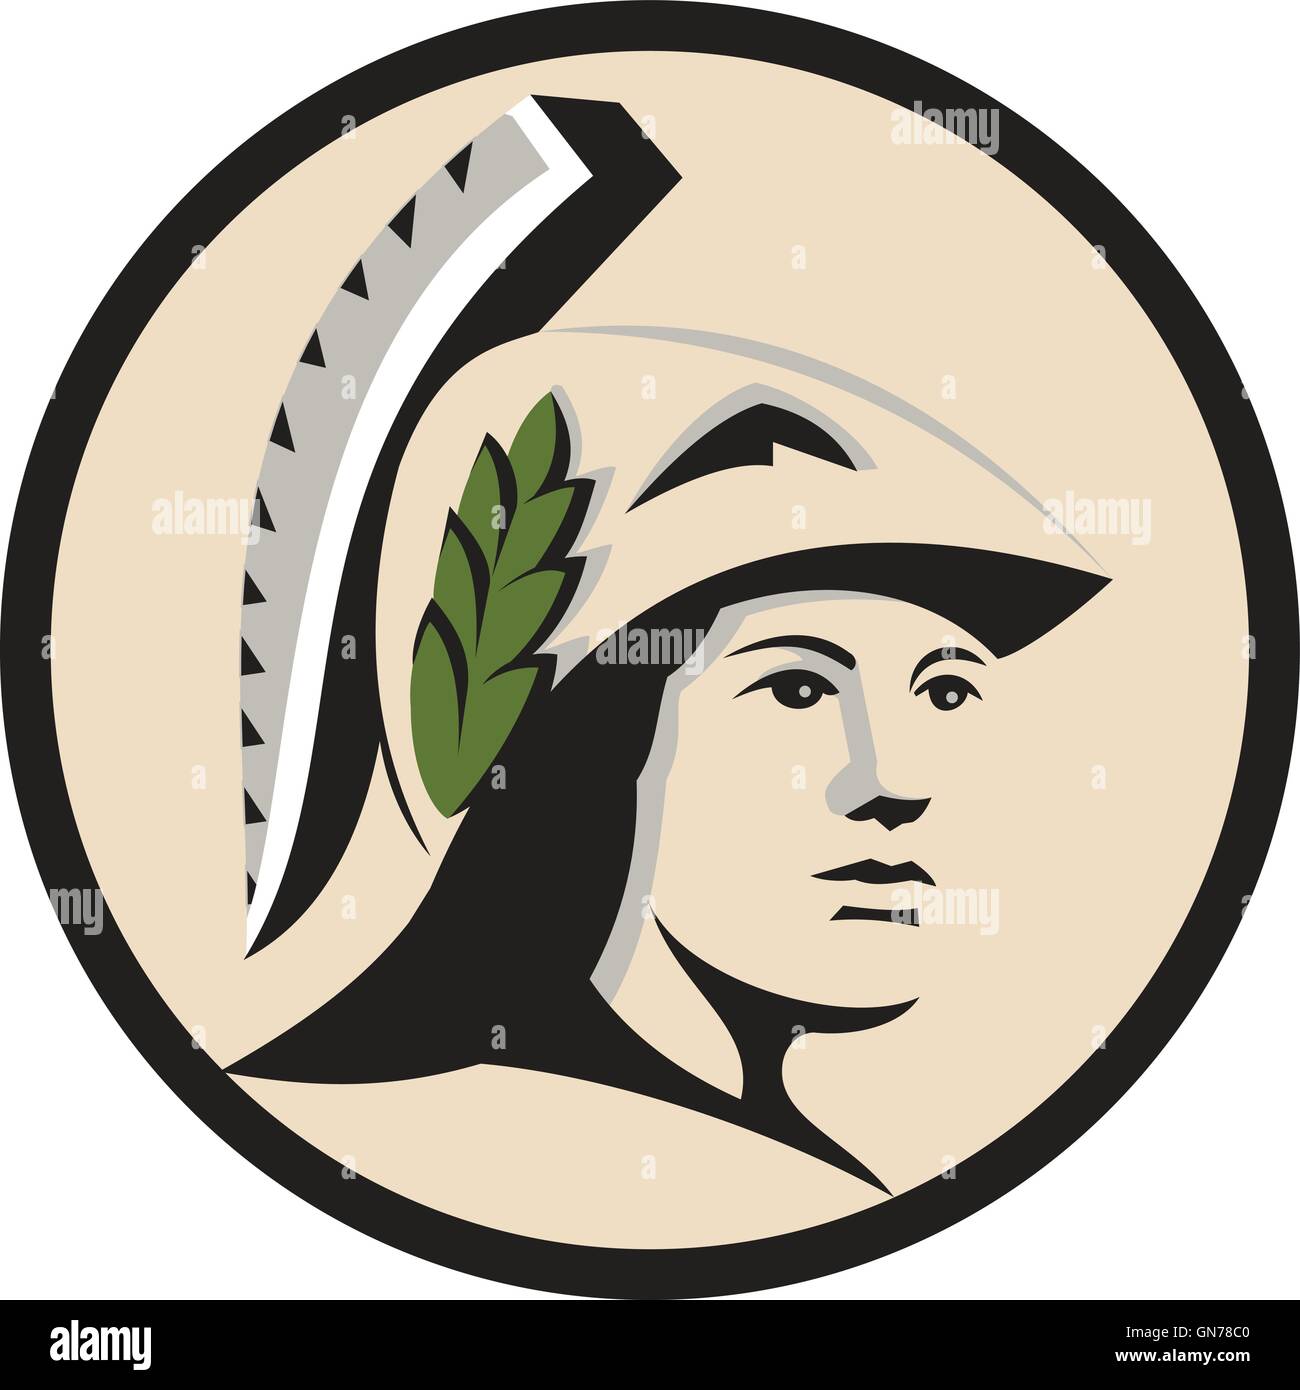 Illustration of Minerva or Menrva, the Roman goddess of wisdom and sponsor of arts, trade, and strategy wearing helment and laurel crown looking to the side viewed from front set inside circle done in retro style. Stock Vector